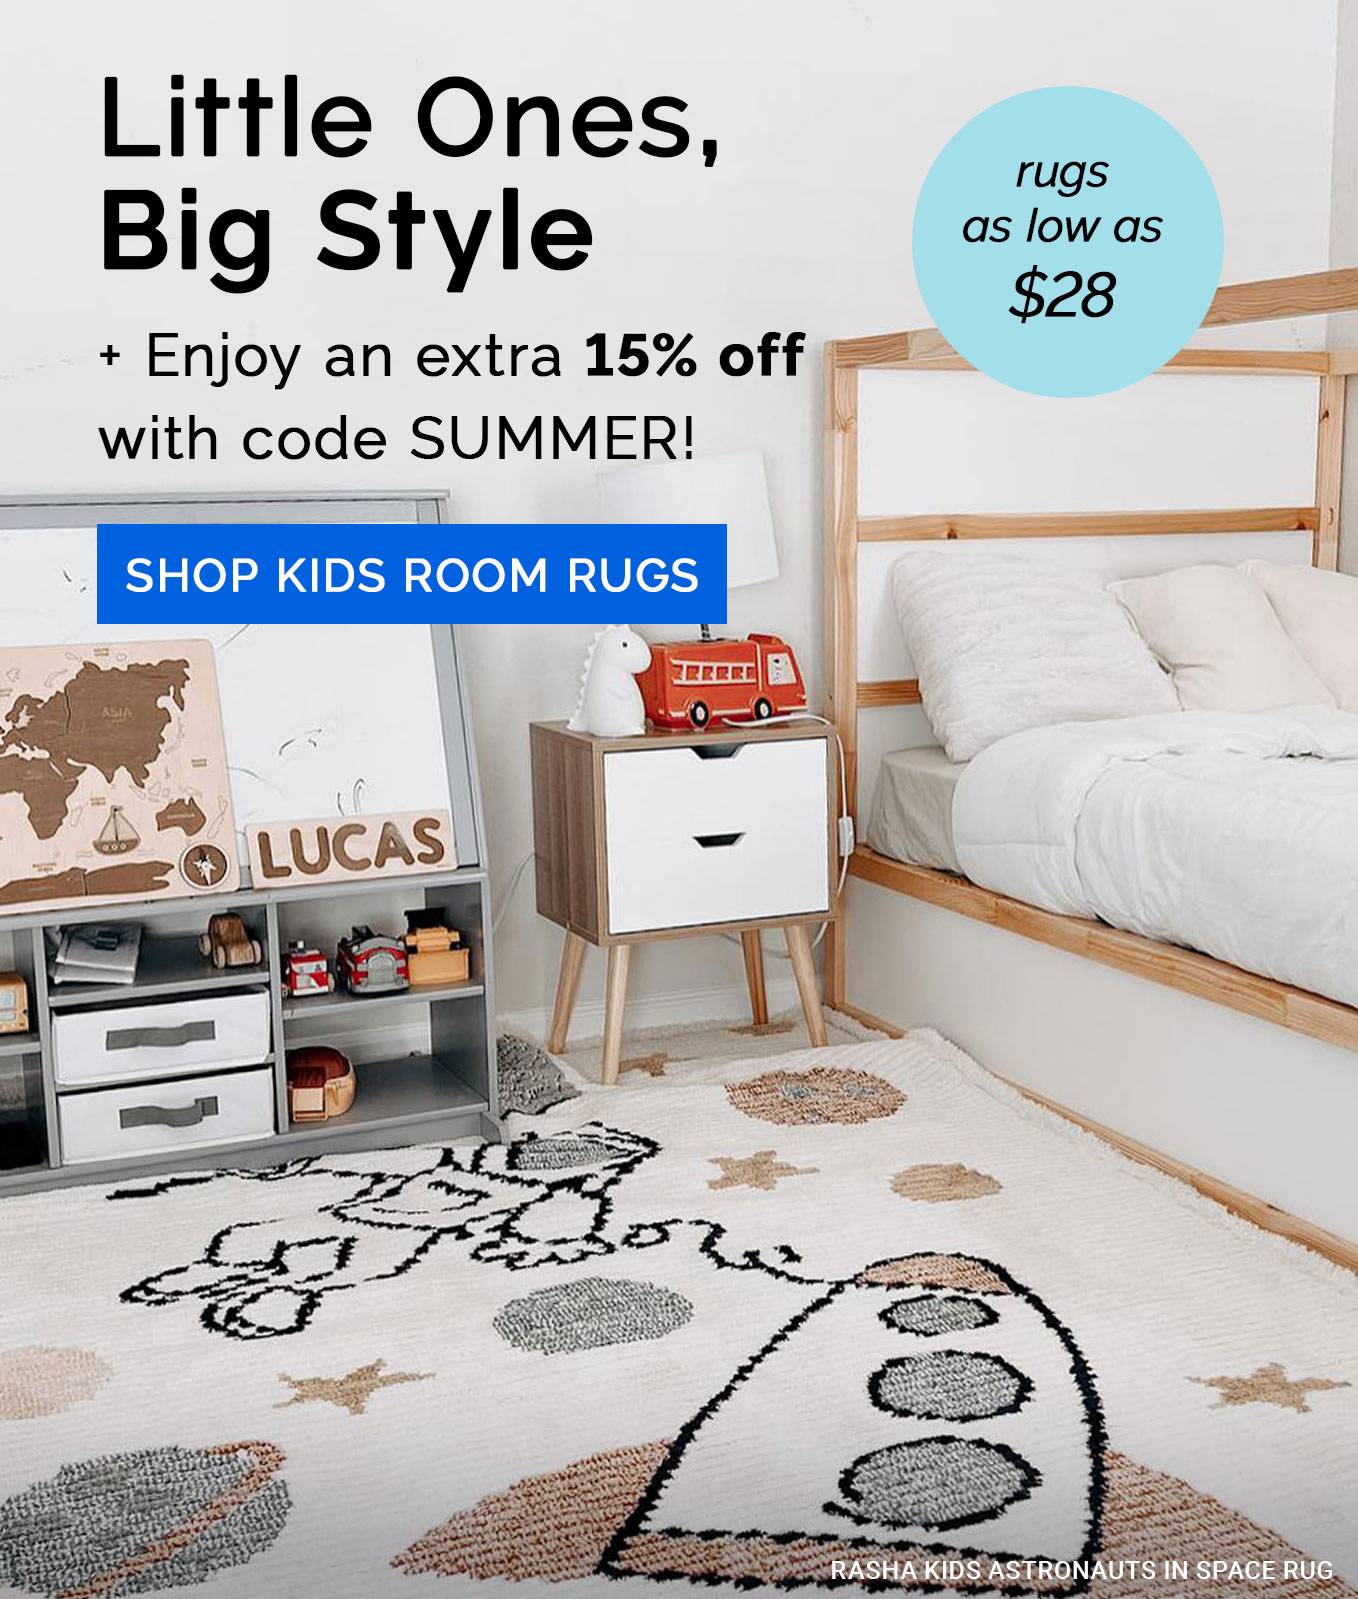 Little Ones, Big Style - rugs as low as $28 + Enjoy an extra 25% off with code SUMMER! Shop Kids Room Rugs